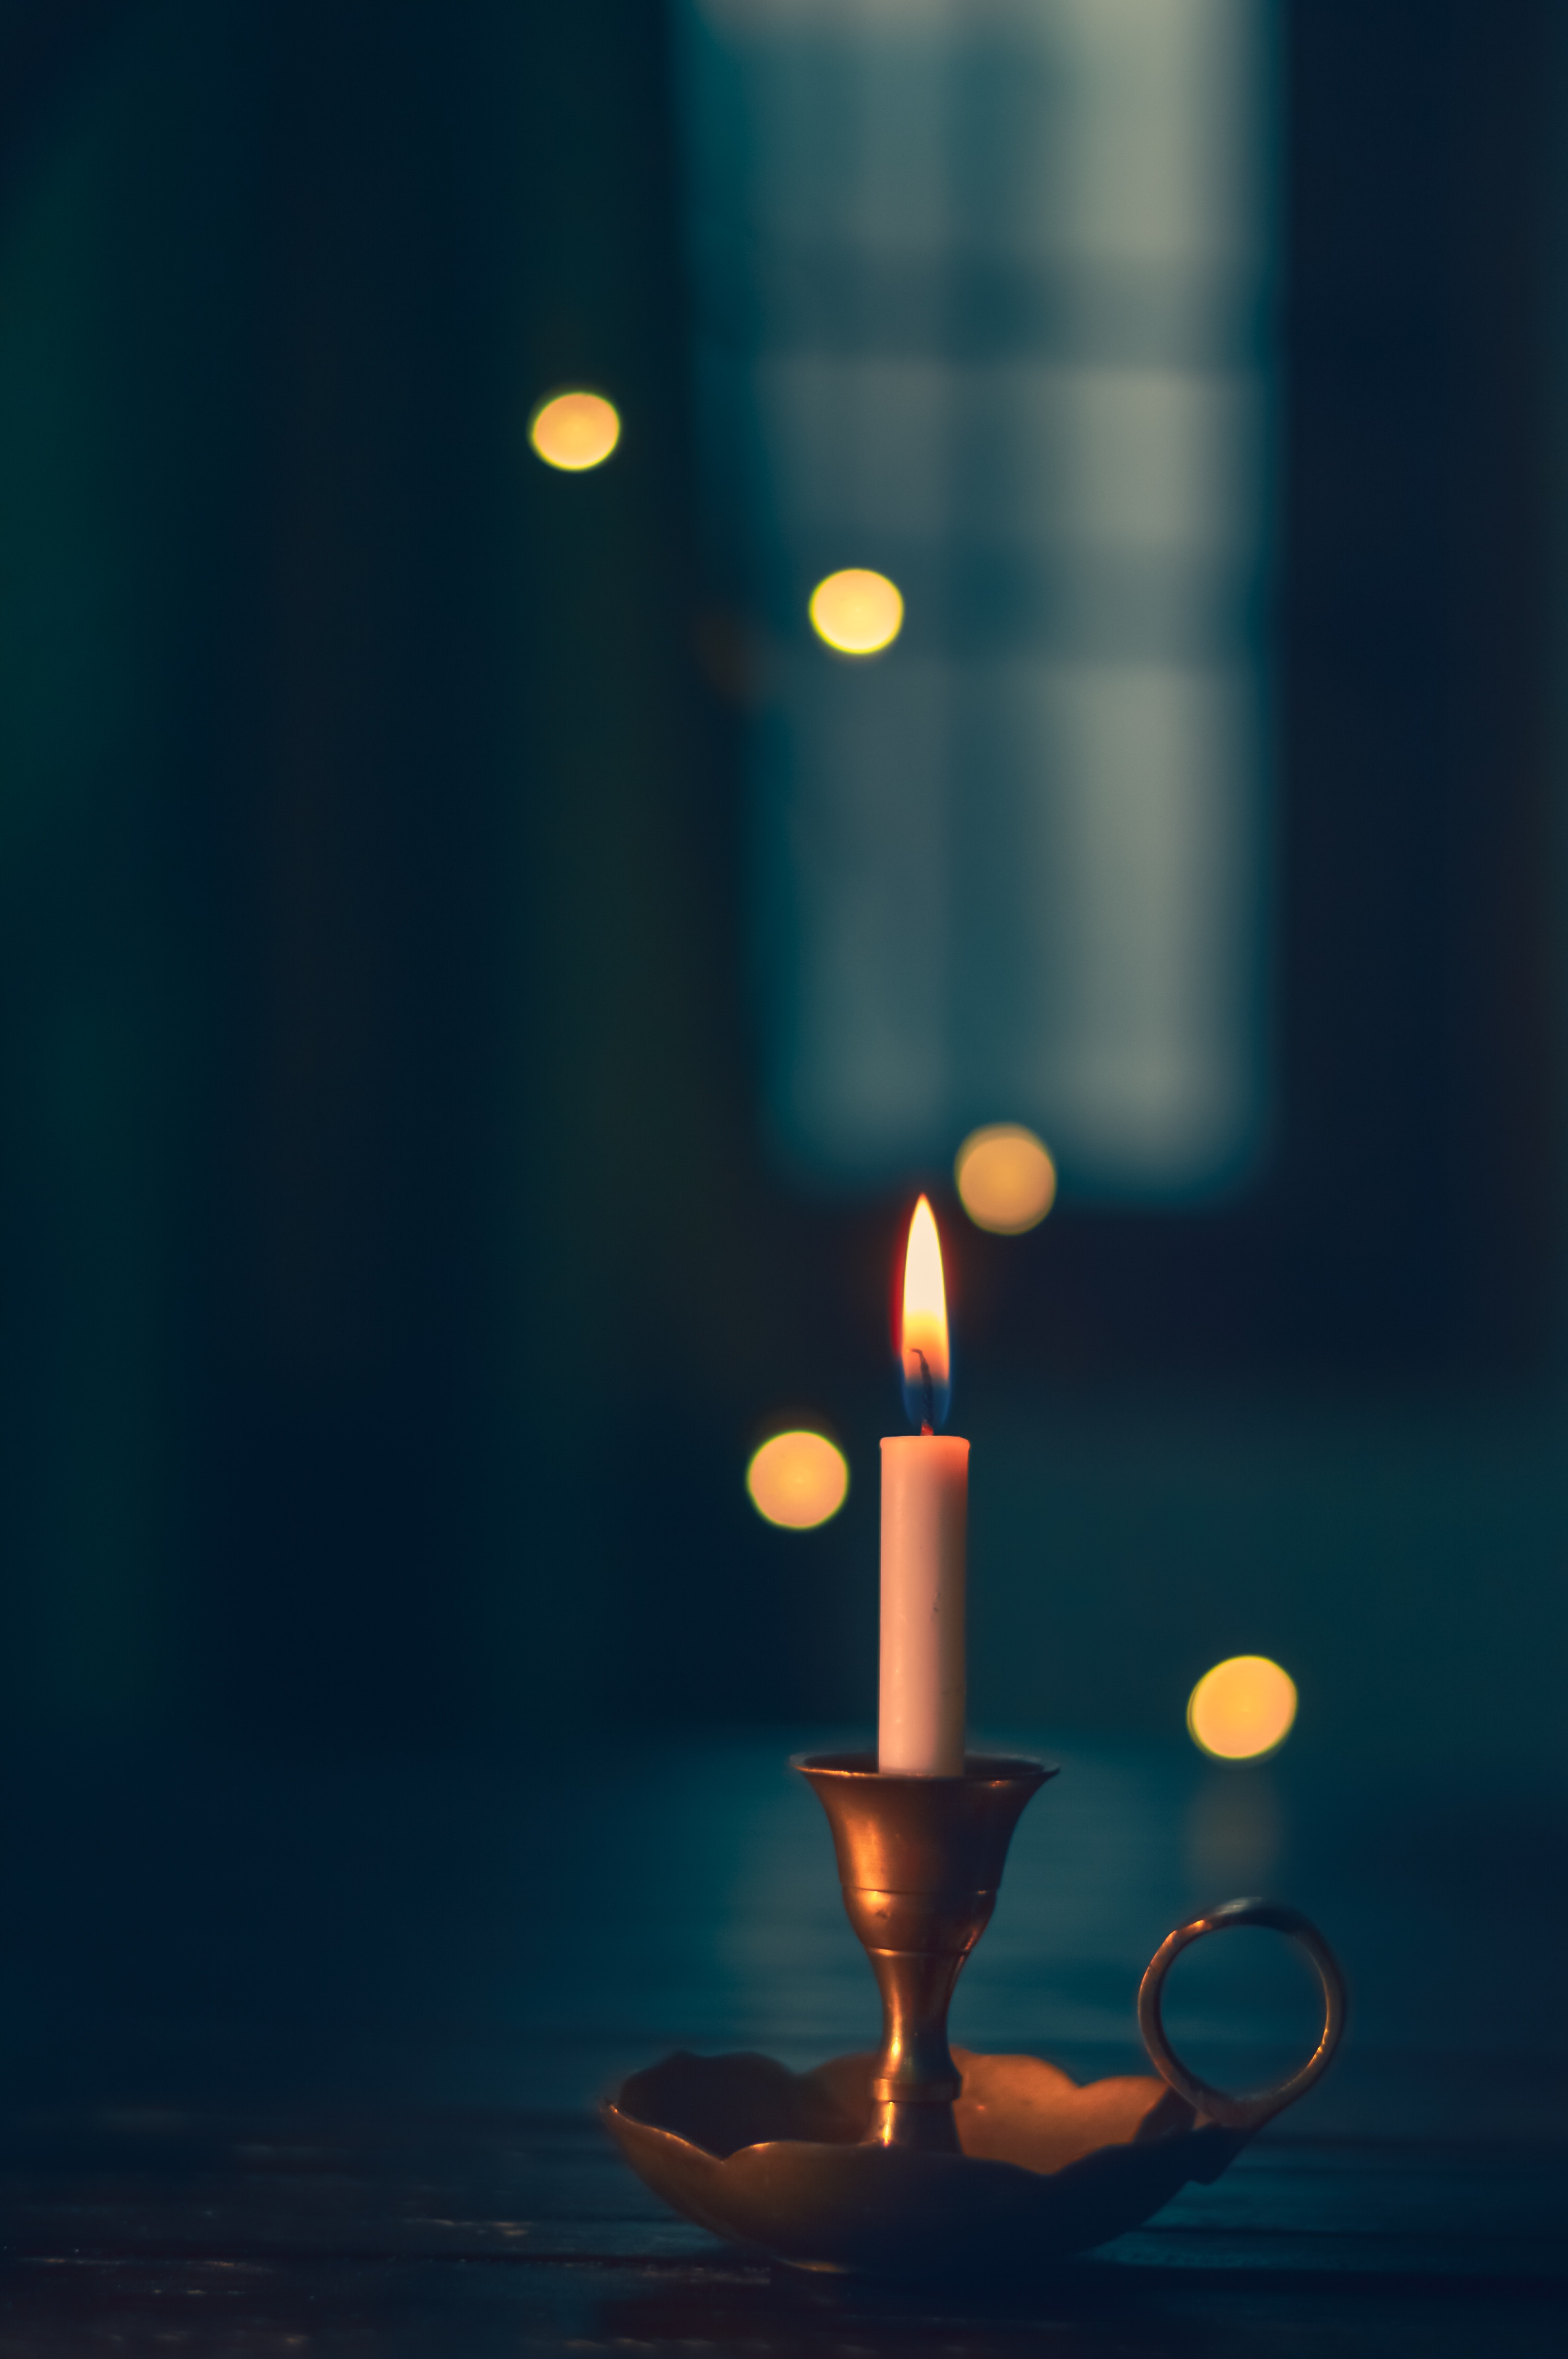 blur, miscellanea, candle, fire, wax, miscellaneous, smooth, wick, candlestick Smartphone Background